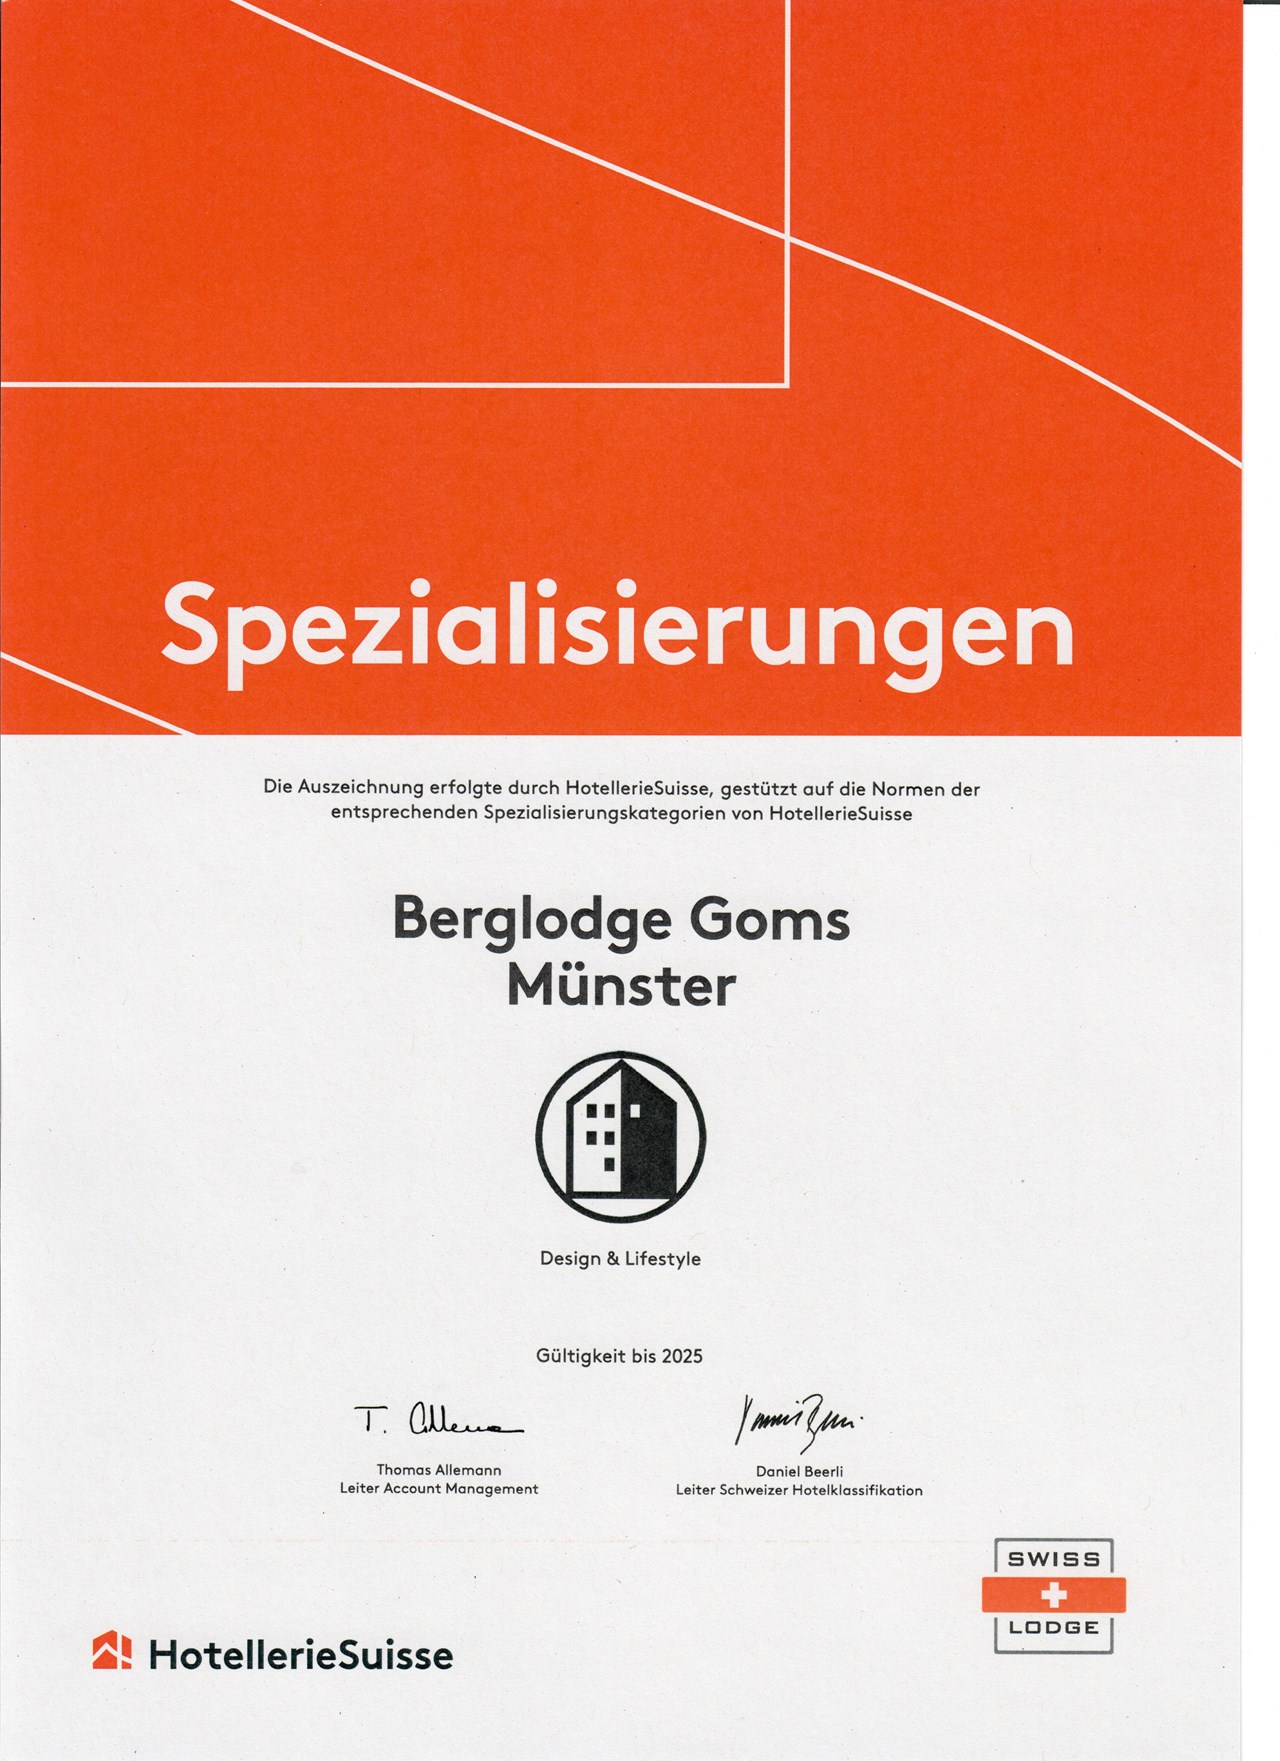 Berglodge Goms Evidence certificates Design & Lifestyle from HotellerieSuisse